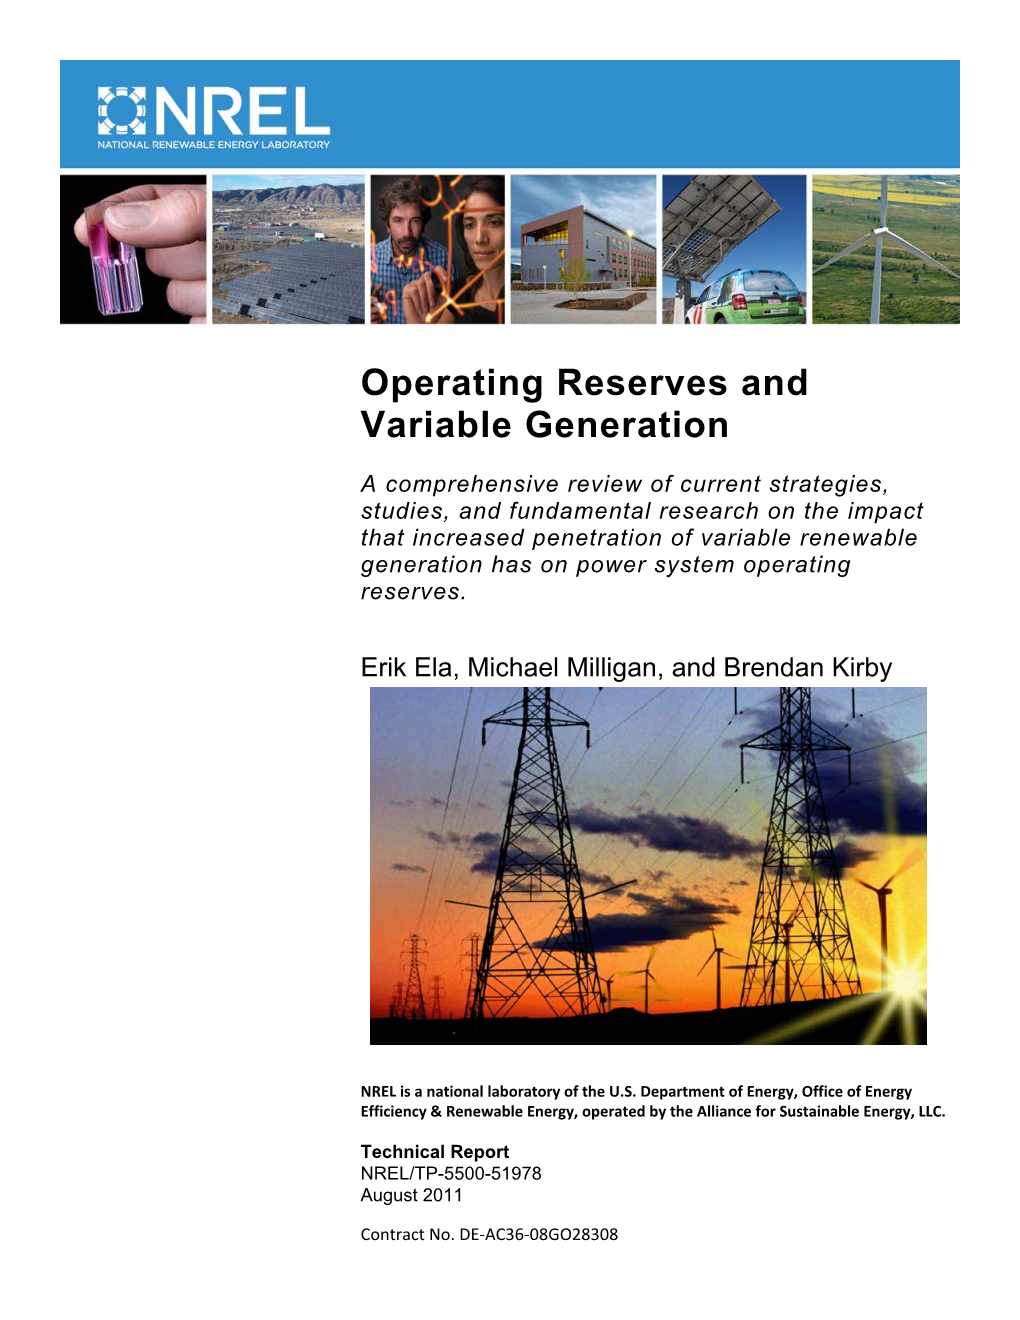 Operating Reserves and Variable Generation